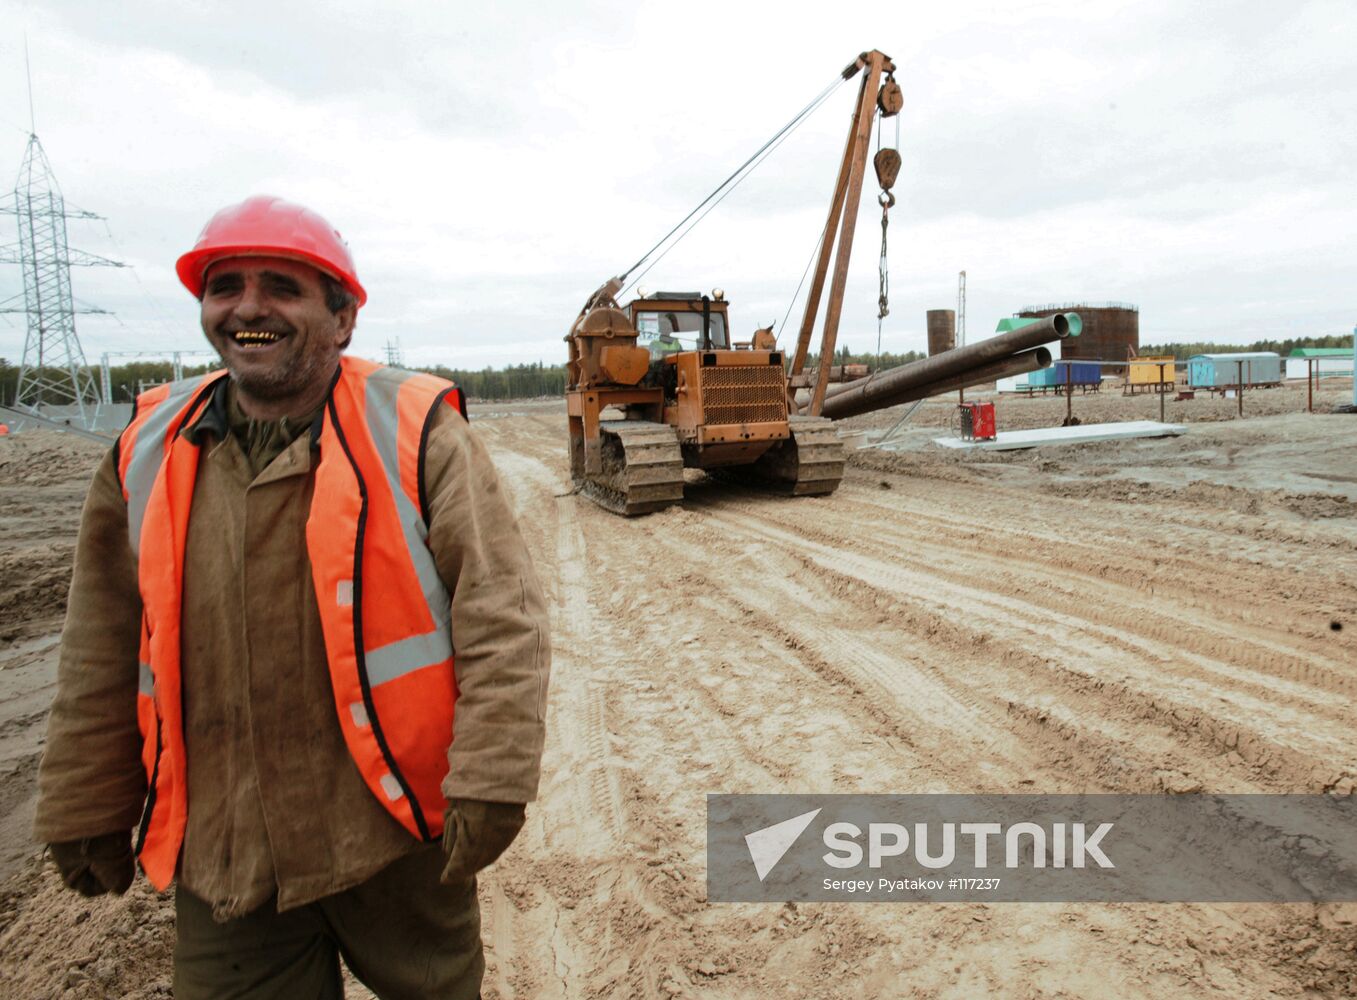 SALYMSKI OIL FIELDS GROUP CONSTRUCTION SITE IMMIGRANT WORKERS